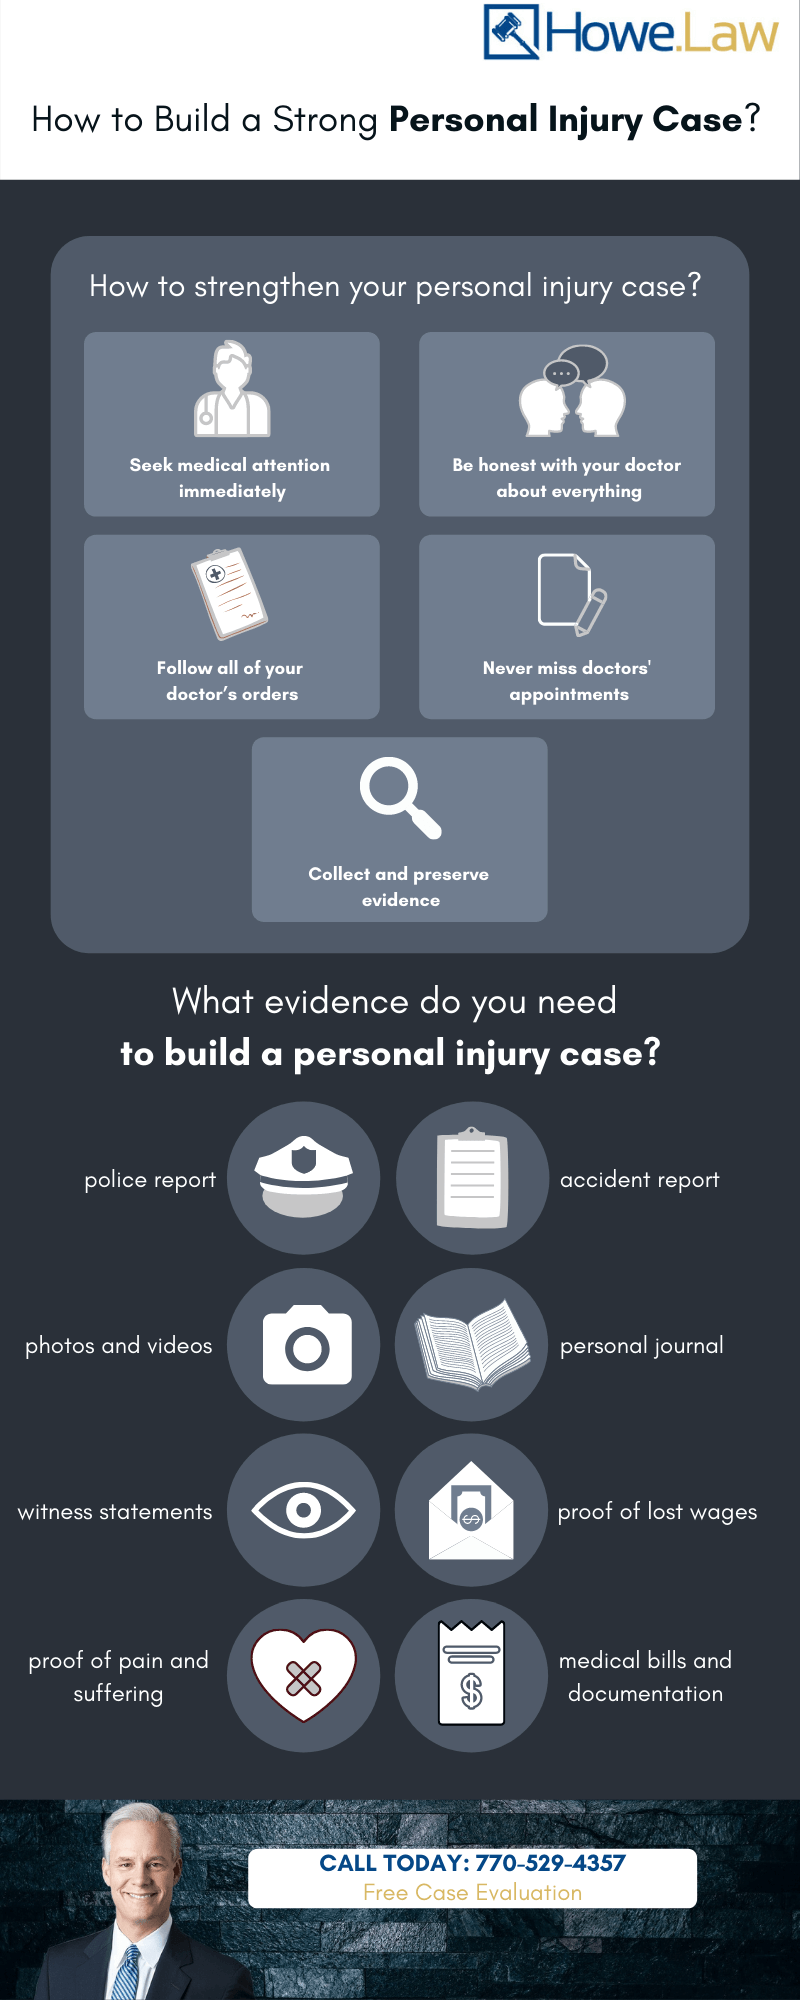 How to Build a Strong Personal Injury Case